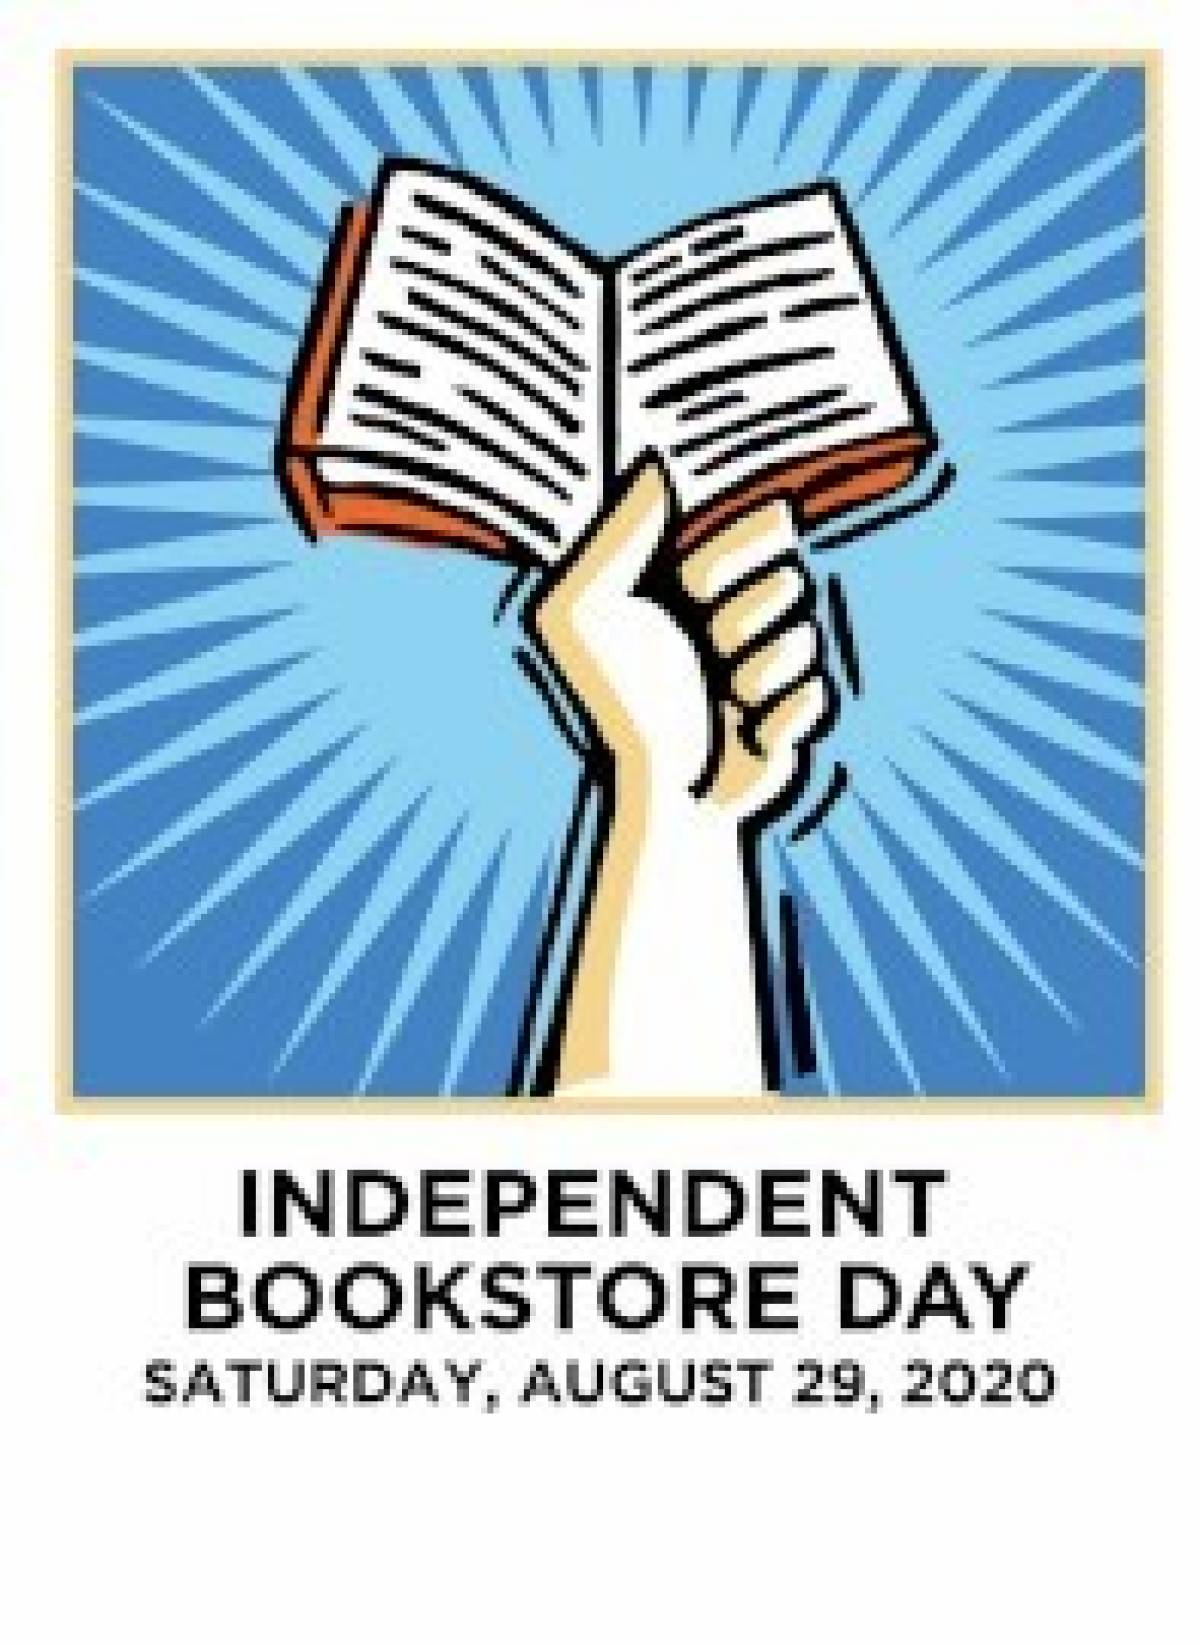 Canadian Independent Bookstore Day ( Saturday, August 29th)